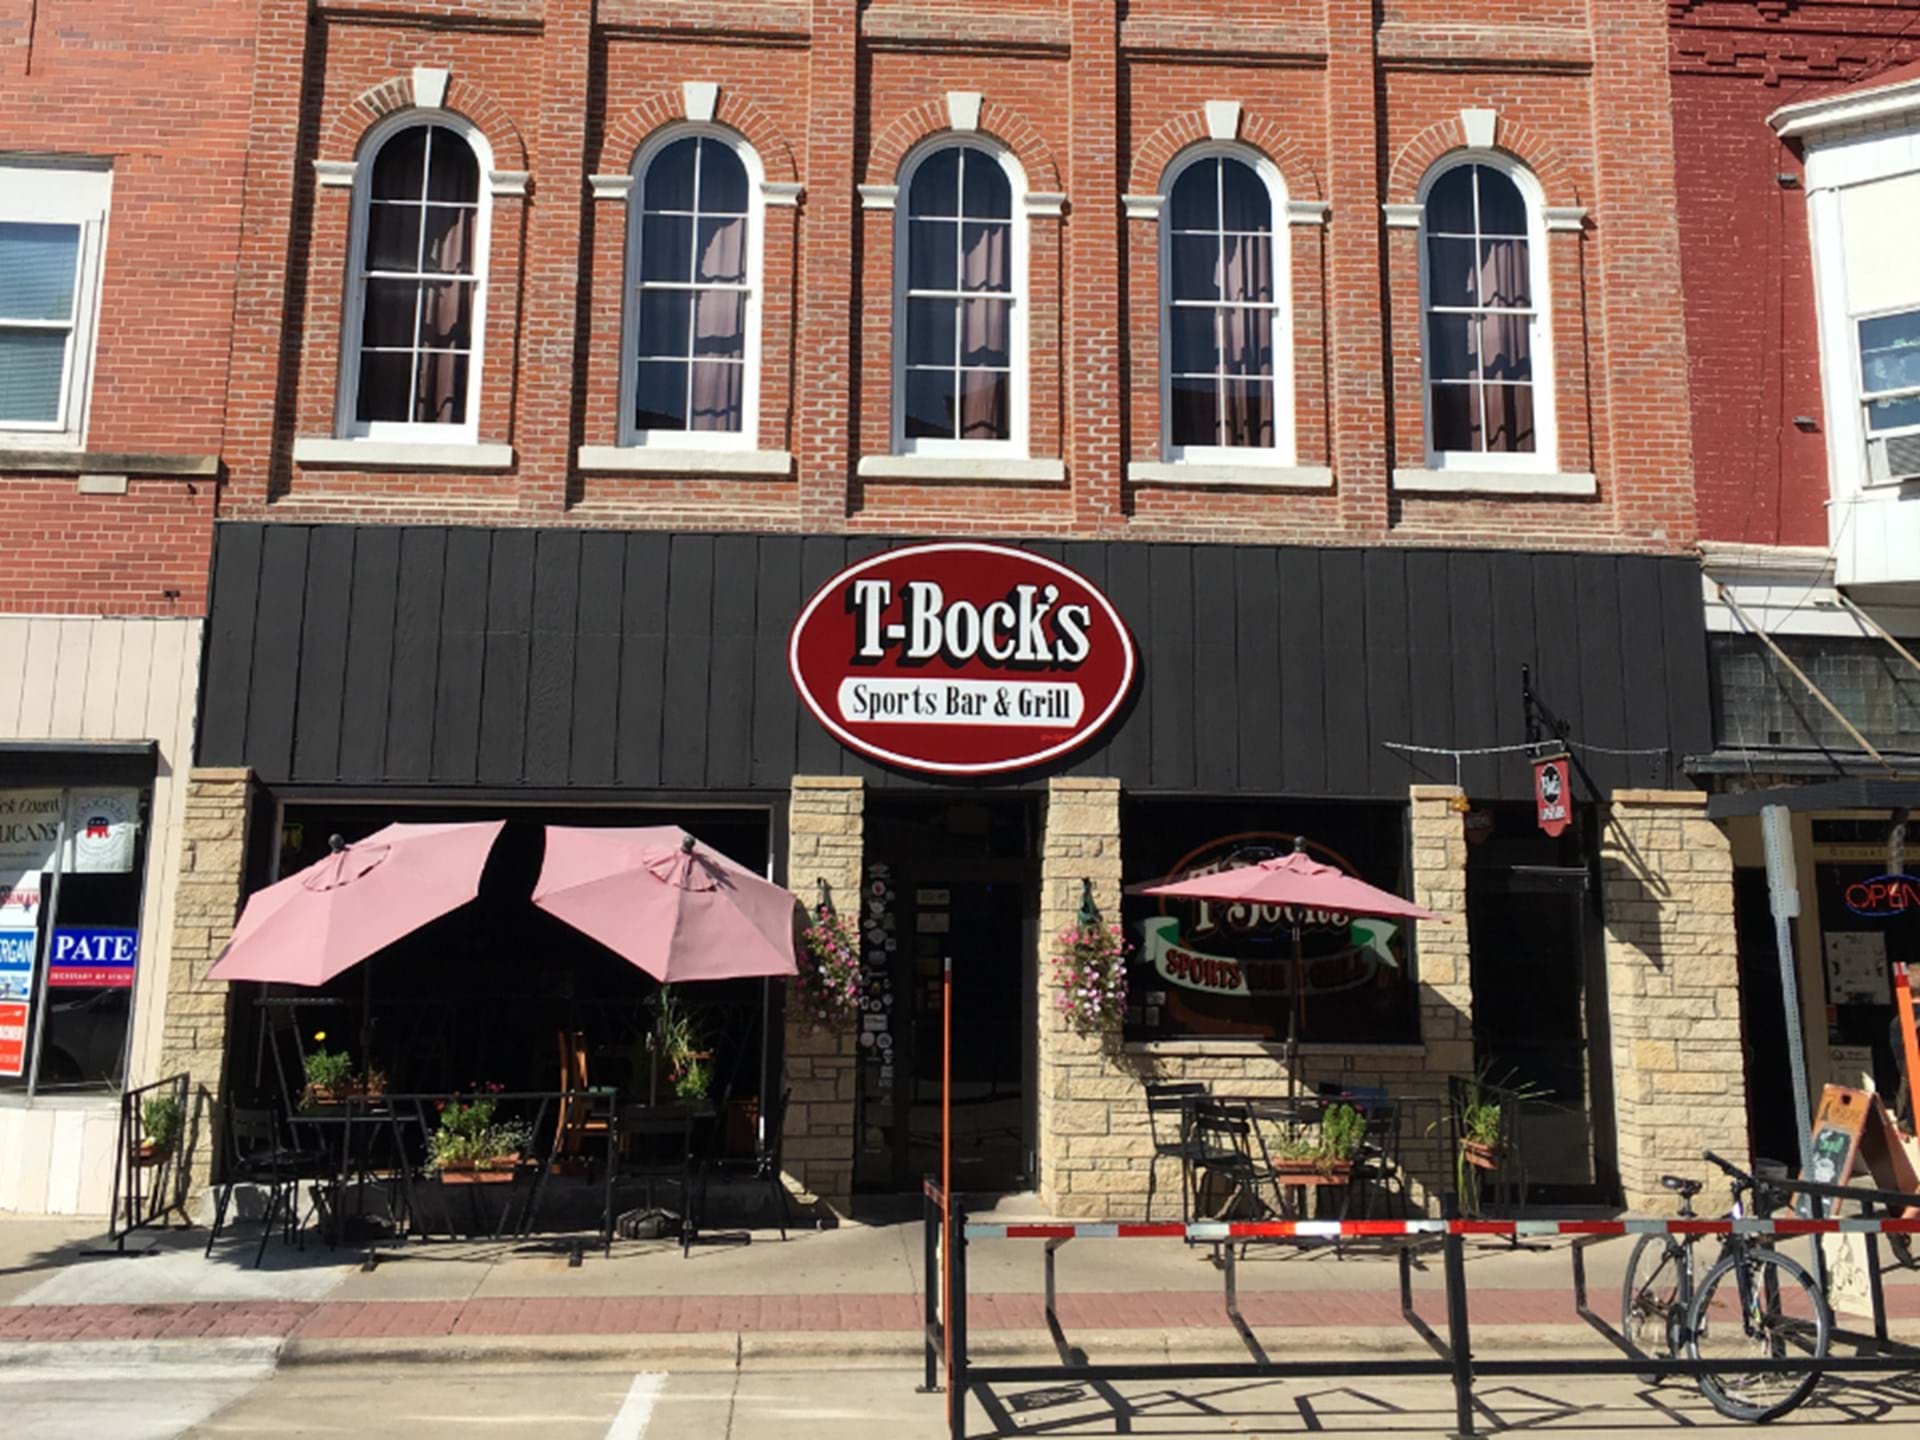 Located in the heart of Downtown Decorah!